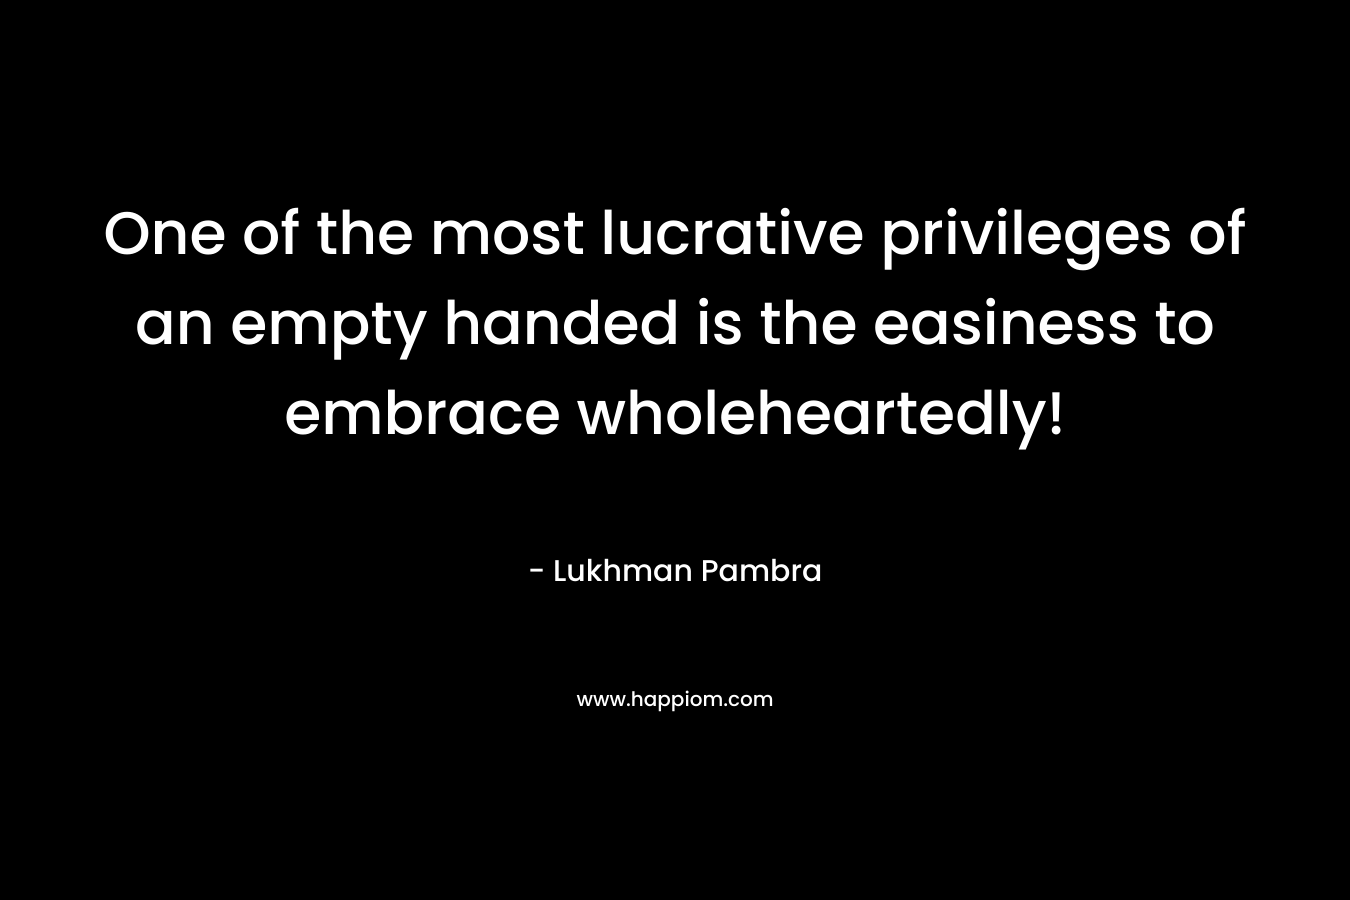 One of the most lucrative privileges of an empty handed is the easiness to embrace wholeheartedly! – Lukhman Pambra